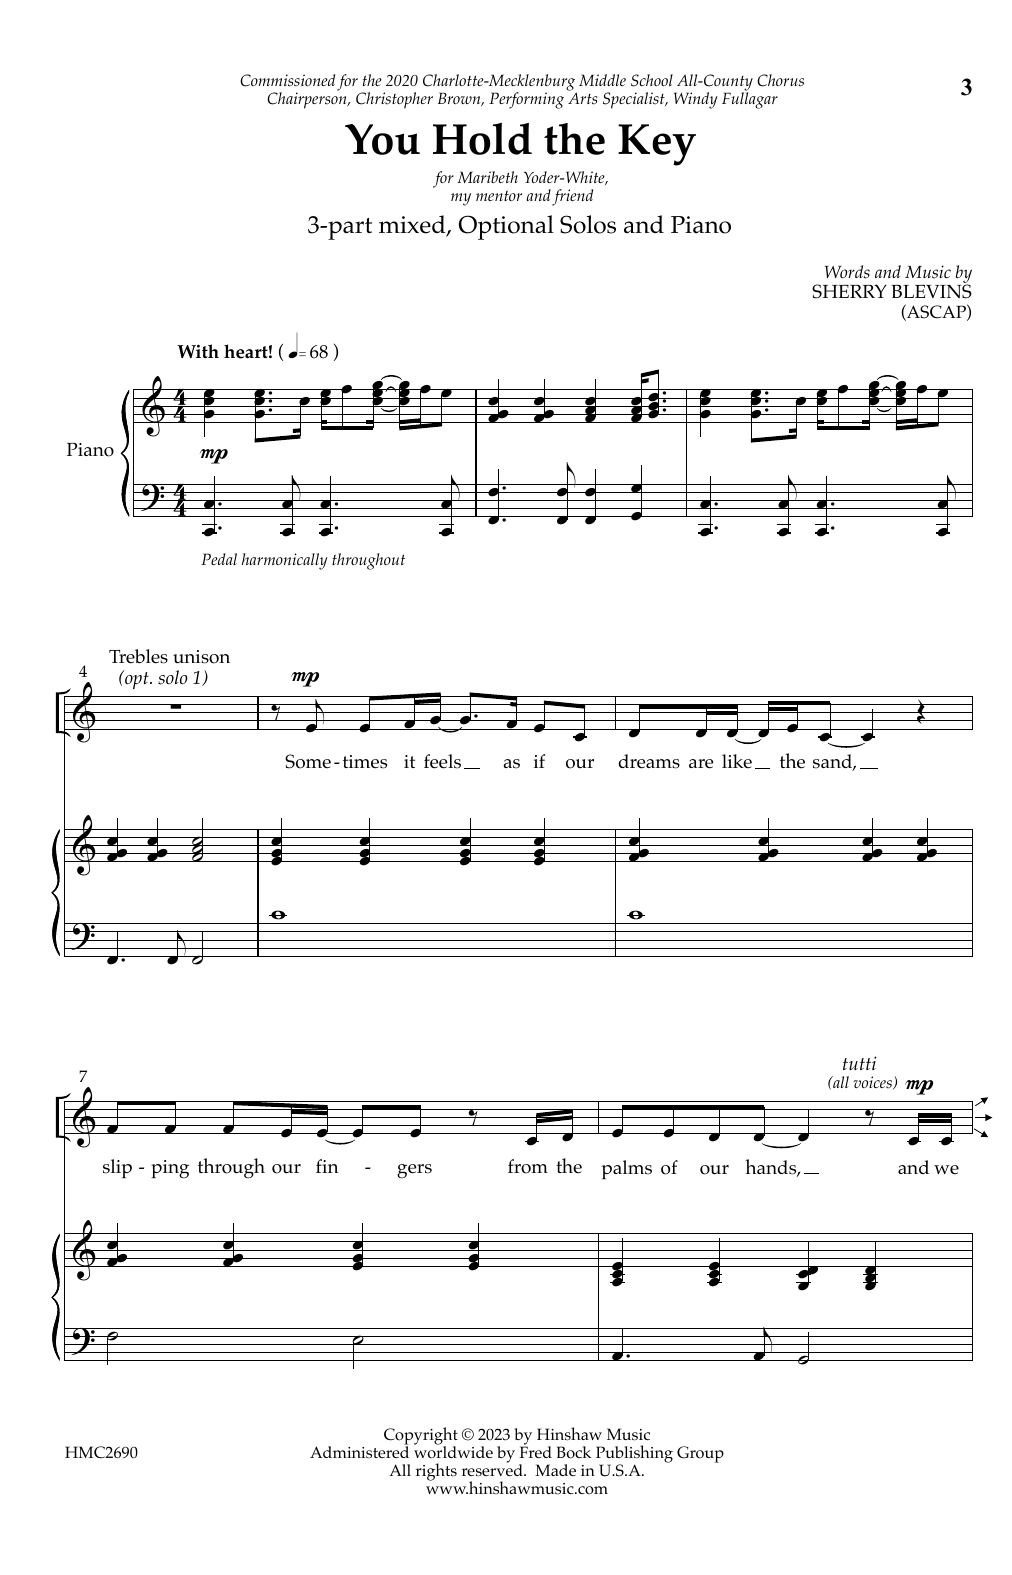 Download Sherry Blevins You Hold The Key Sheet Music